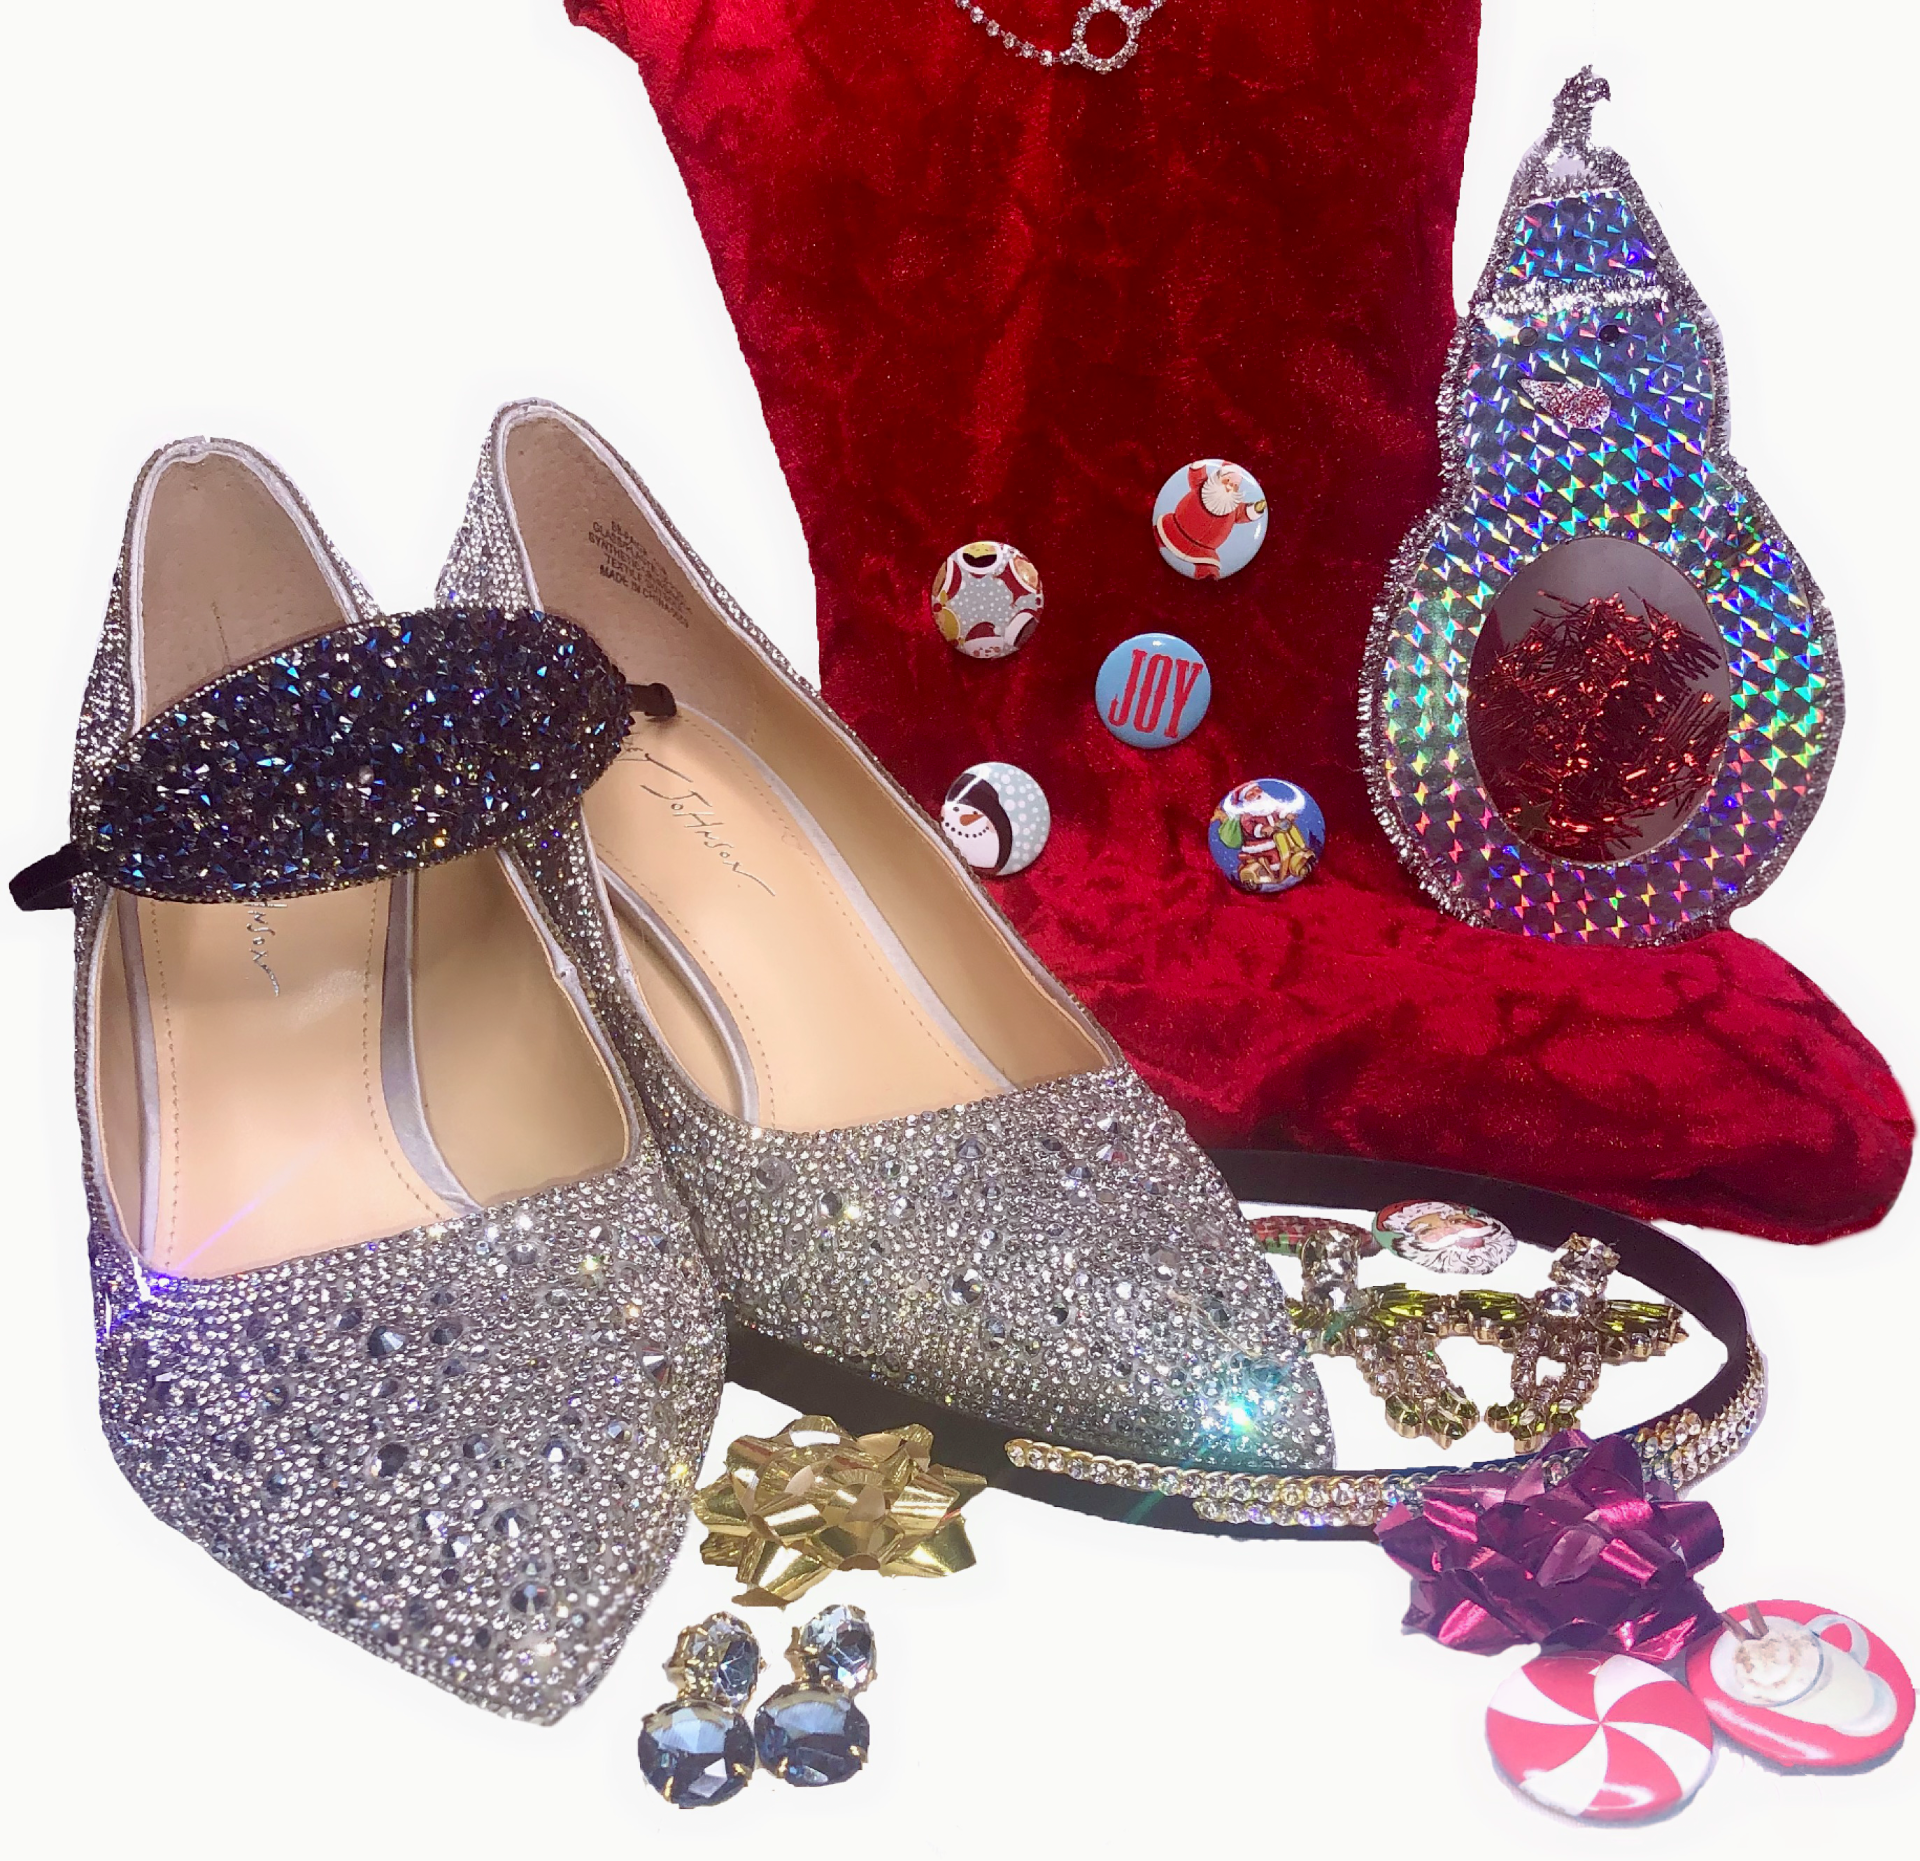 Embellished Shoes and Accessories for the Christmas and New Year